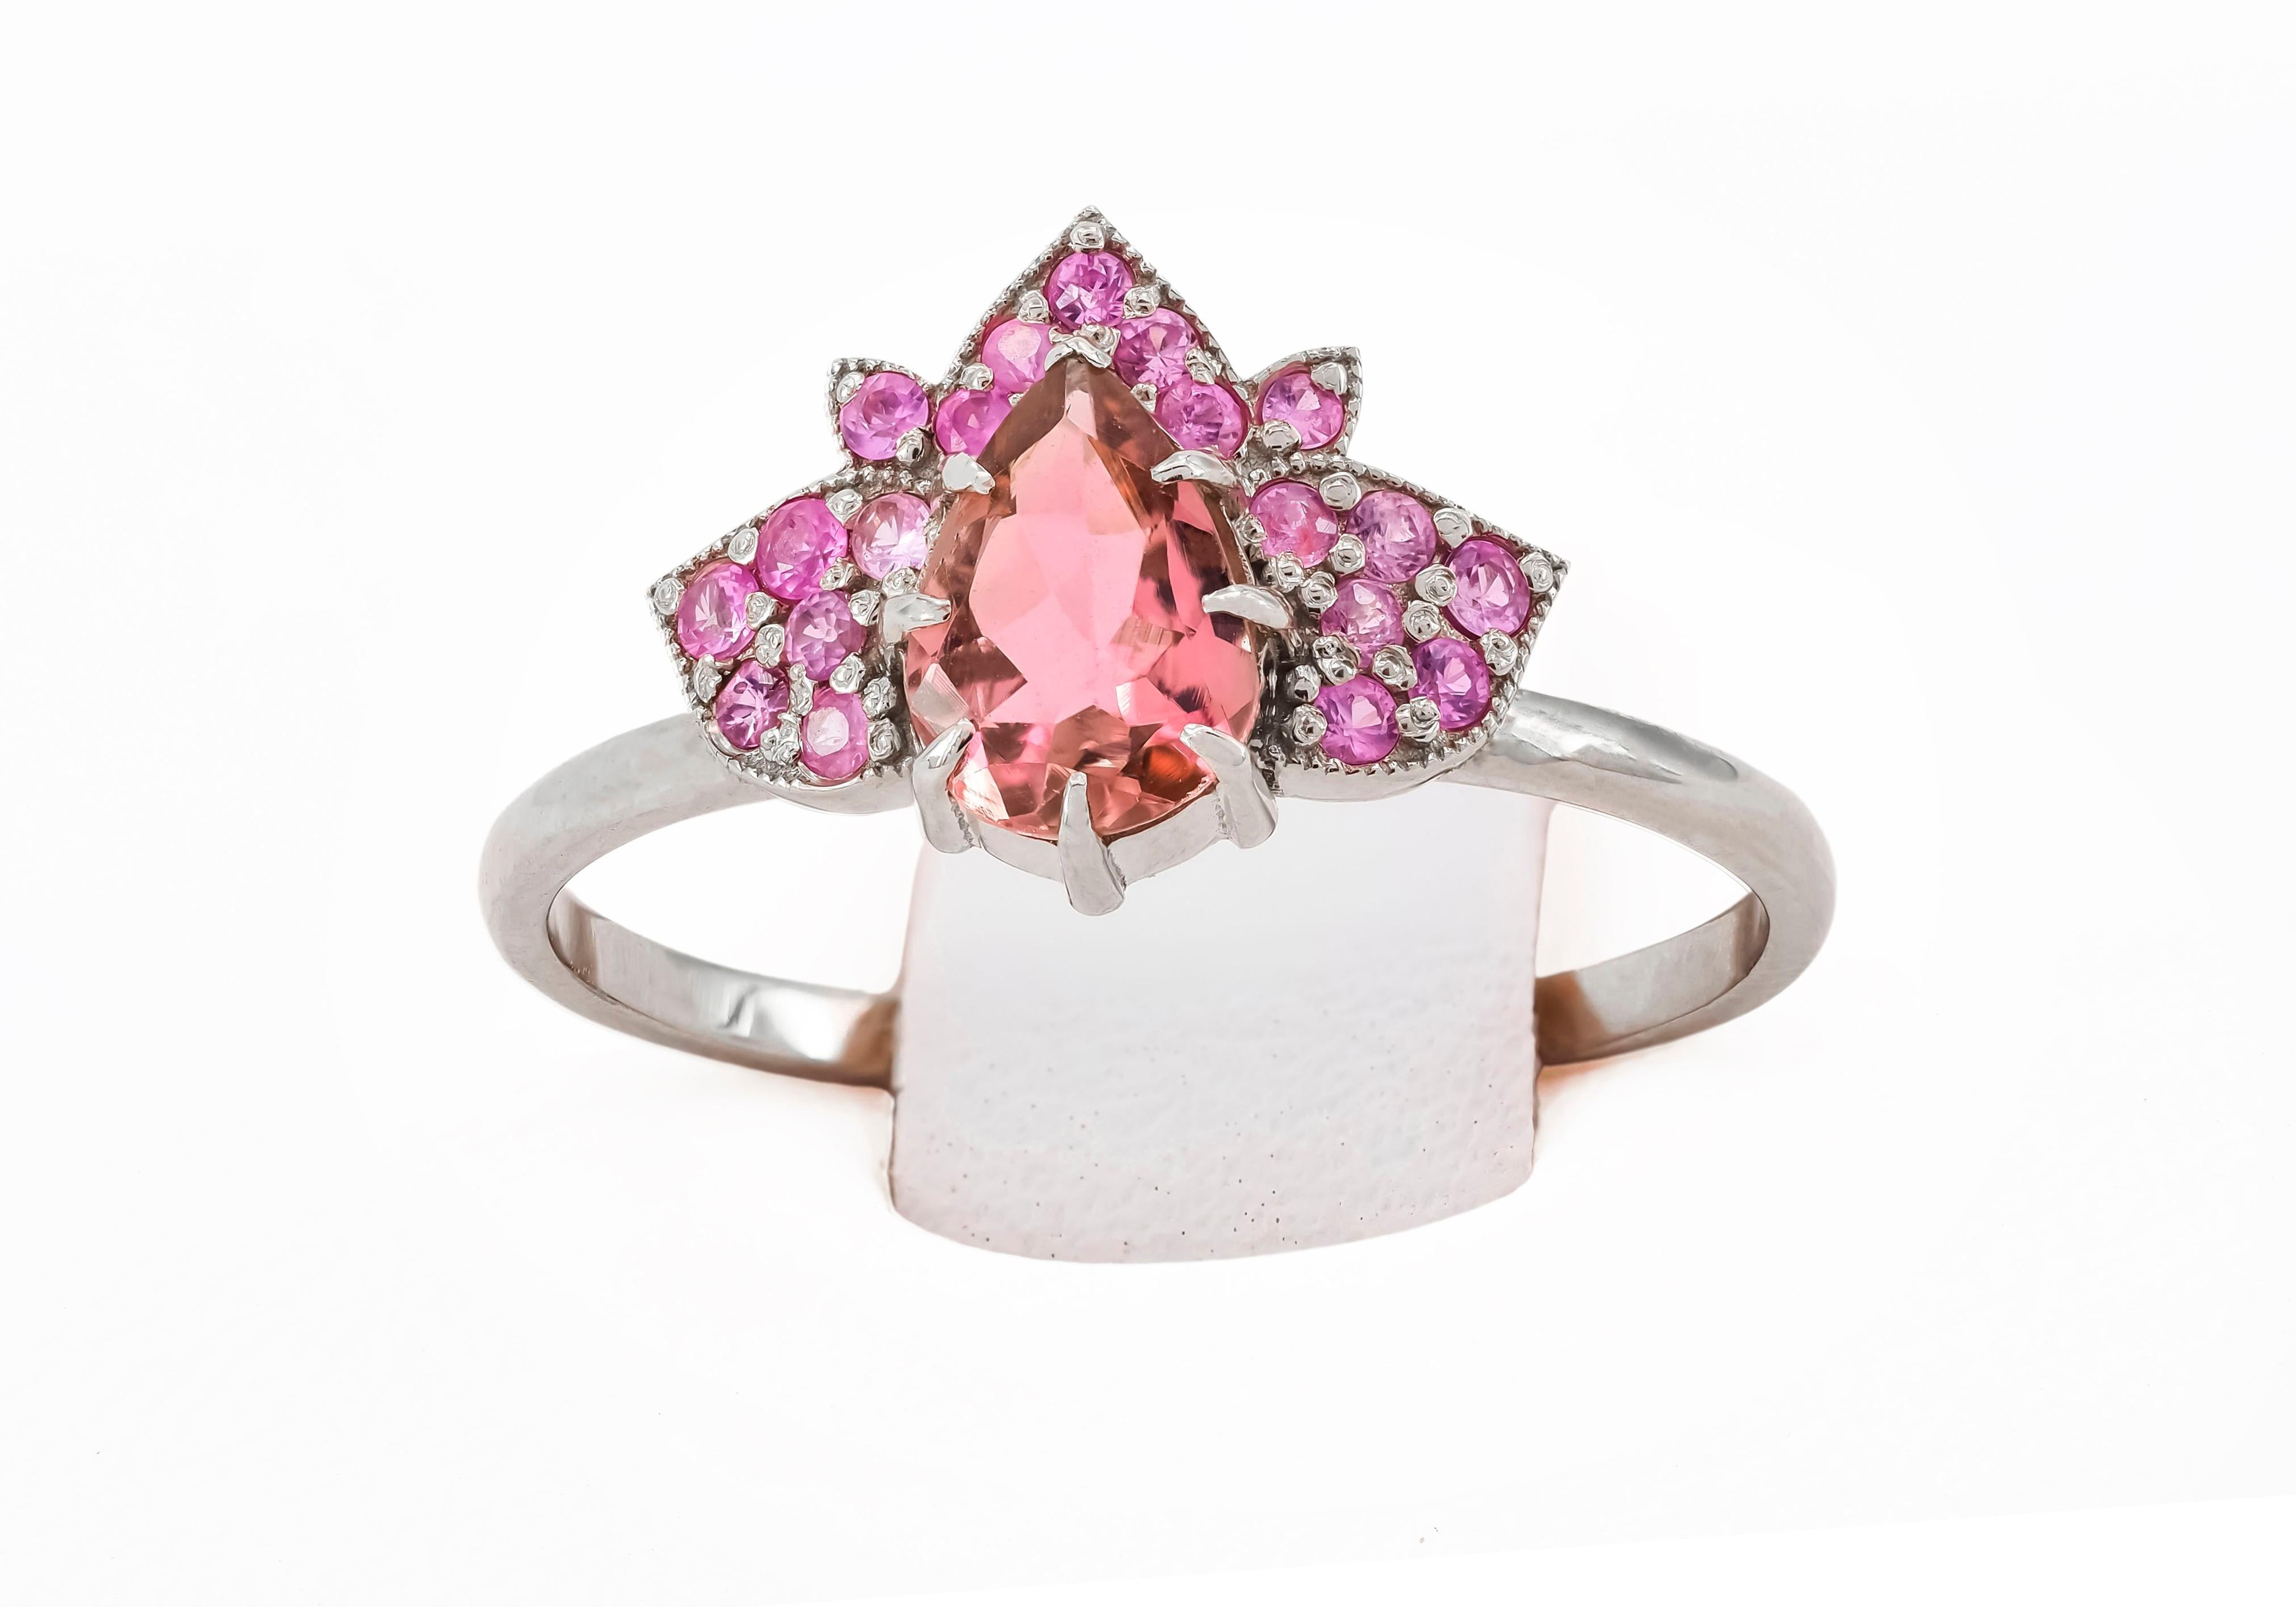 For Sale:  14 karat gold Lotus ring with pink tourmaline and sapphires 6